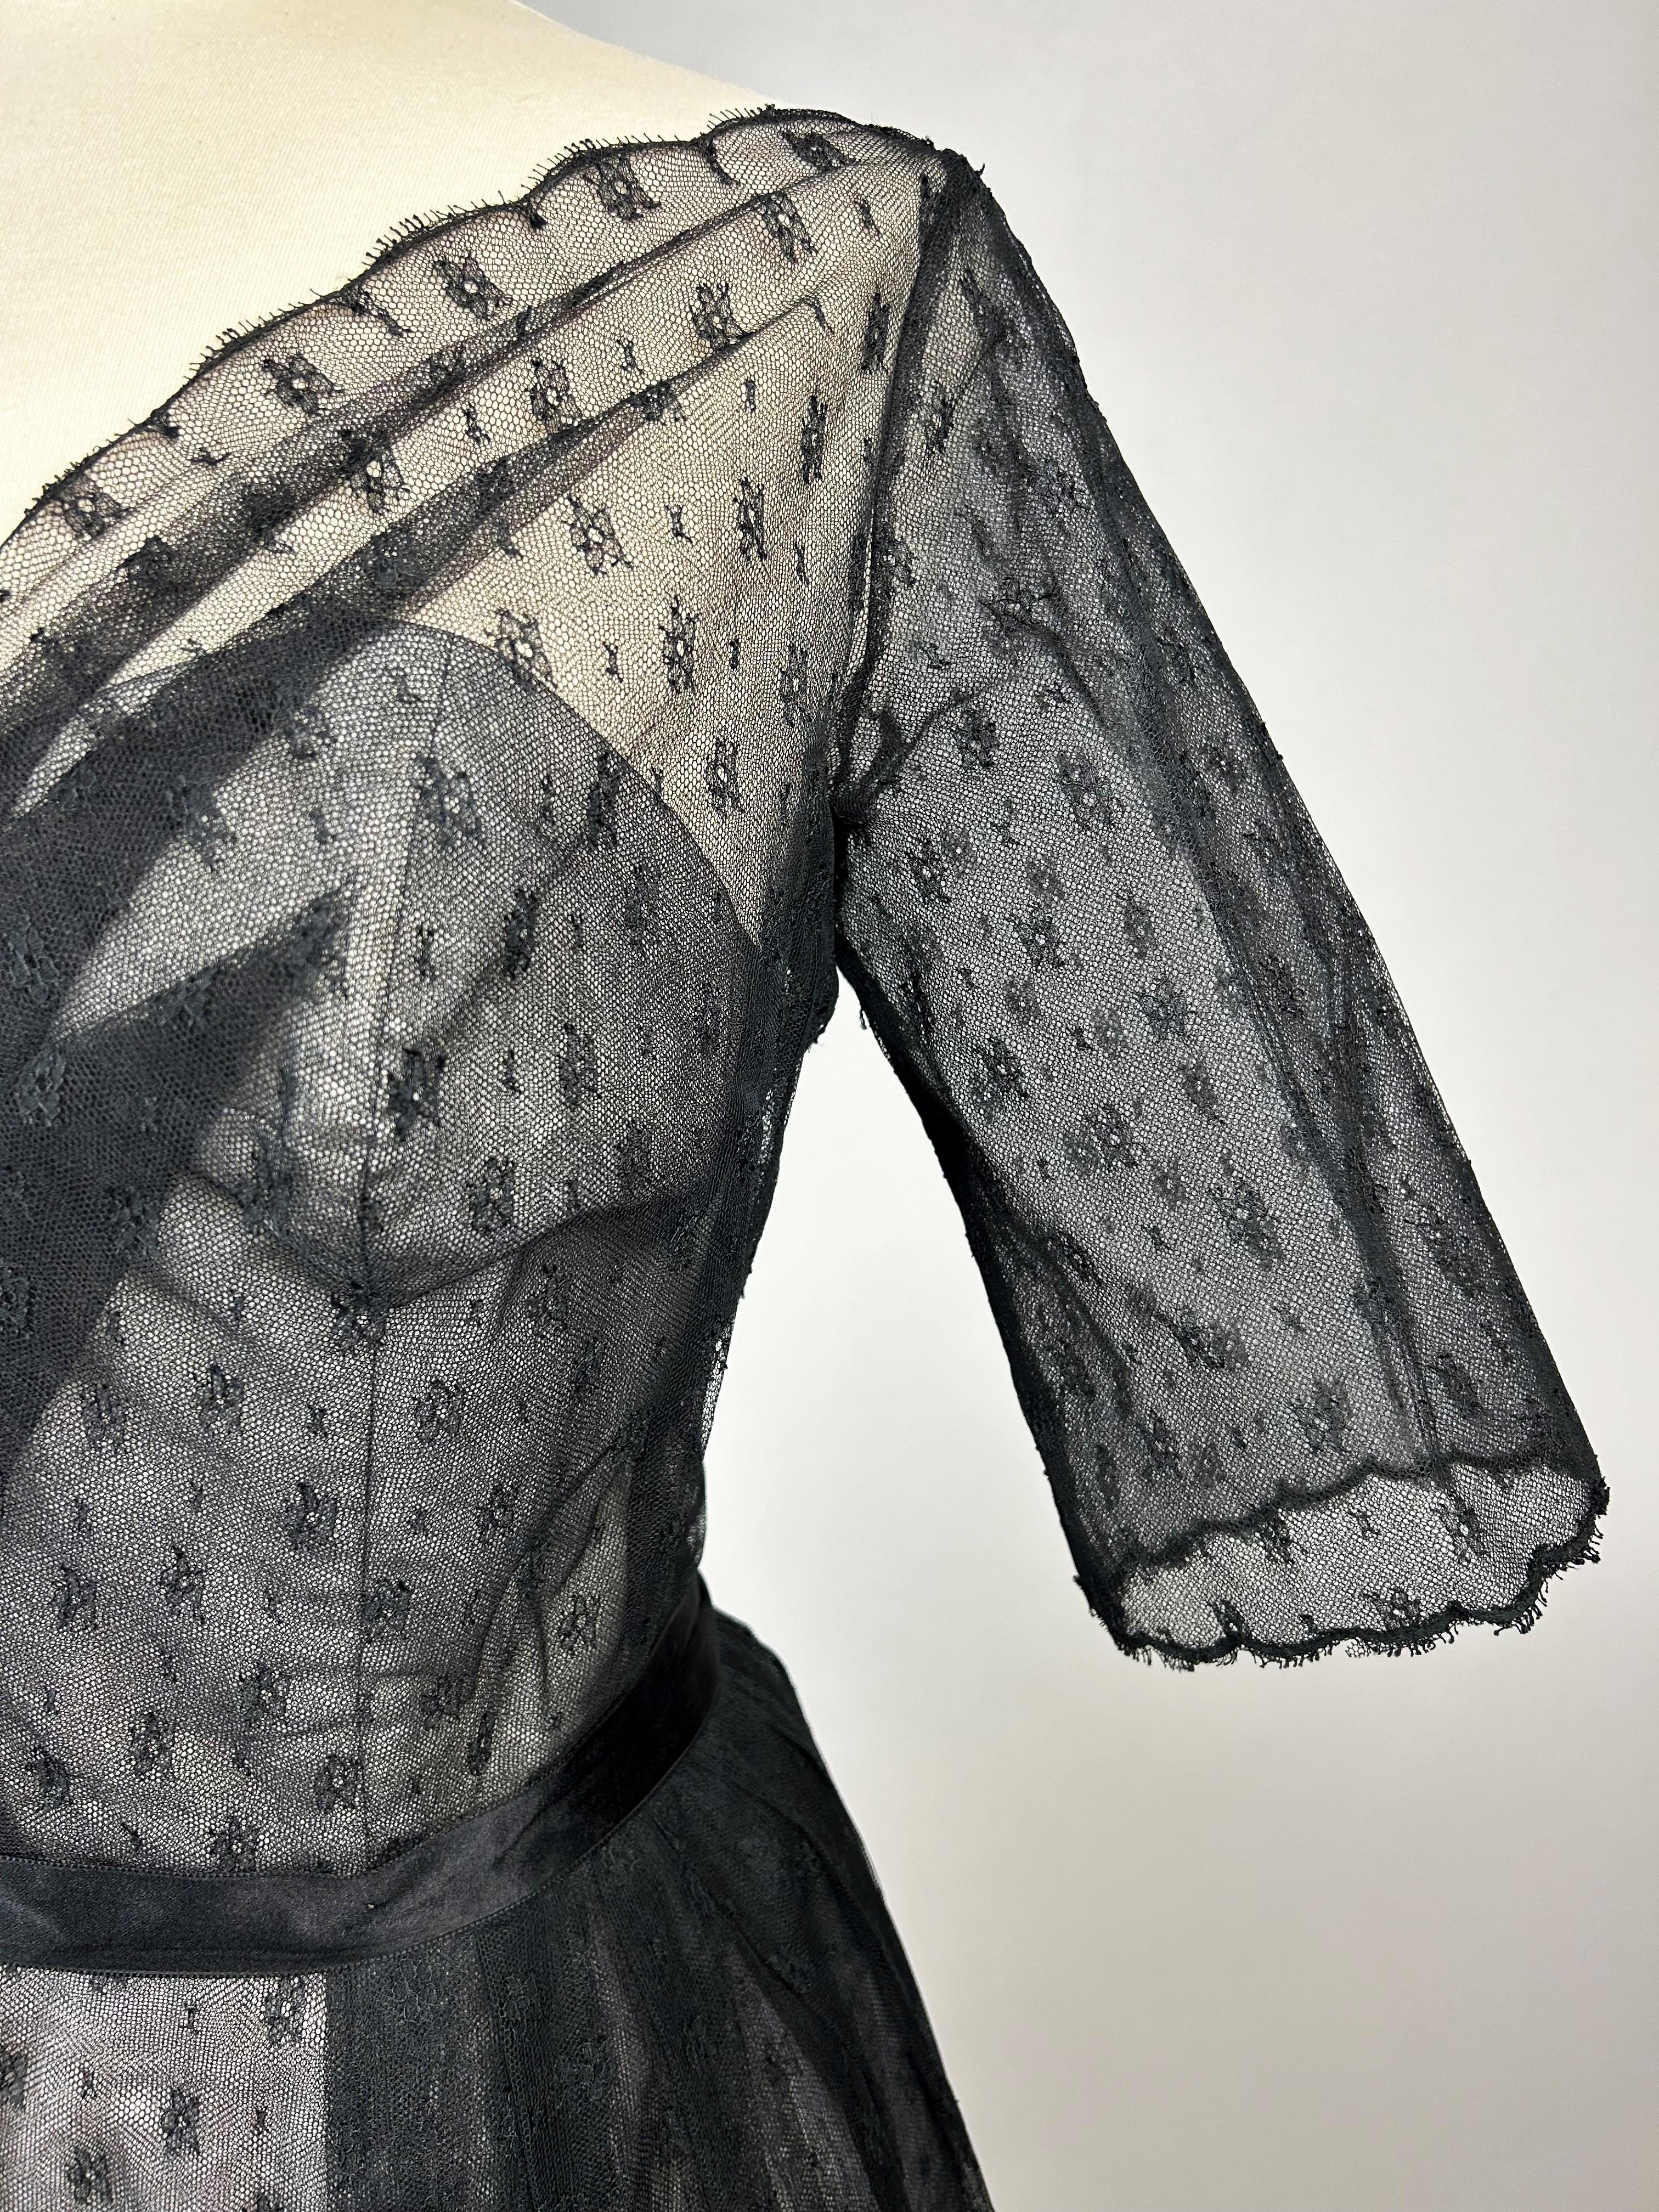 Christian Dior/Saint Laurent Couture Lace Dress (attributed to) Almaviva C.1960 13